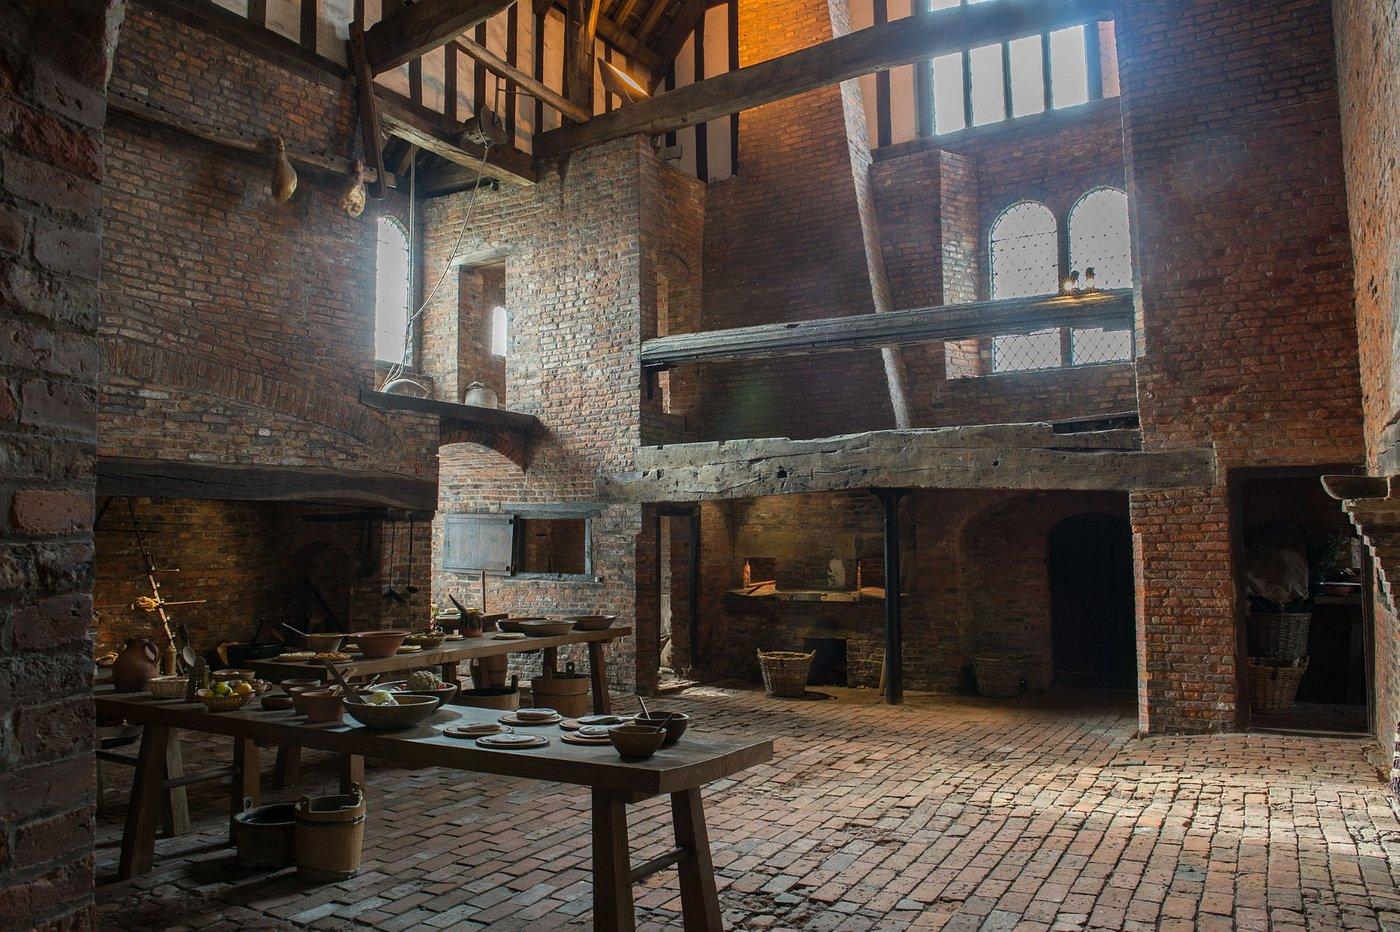 Gainsborough Old Hall Lincolnshire. This large, late-medieval manor house built by the noble Burgh family around 1460 boasts one of the few remaining medieval kitchens.jpg